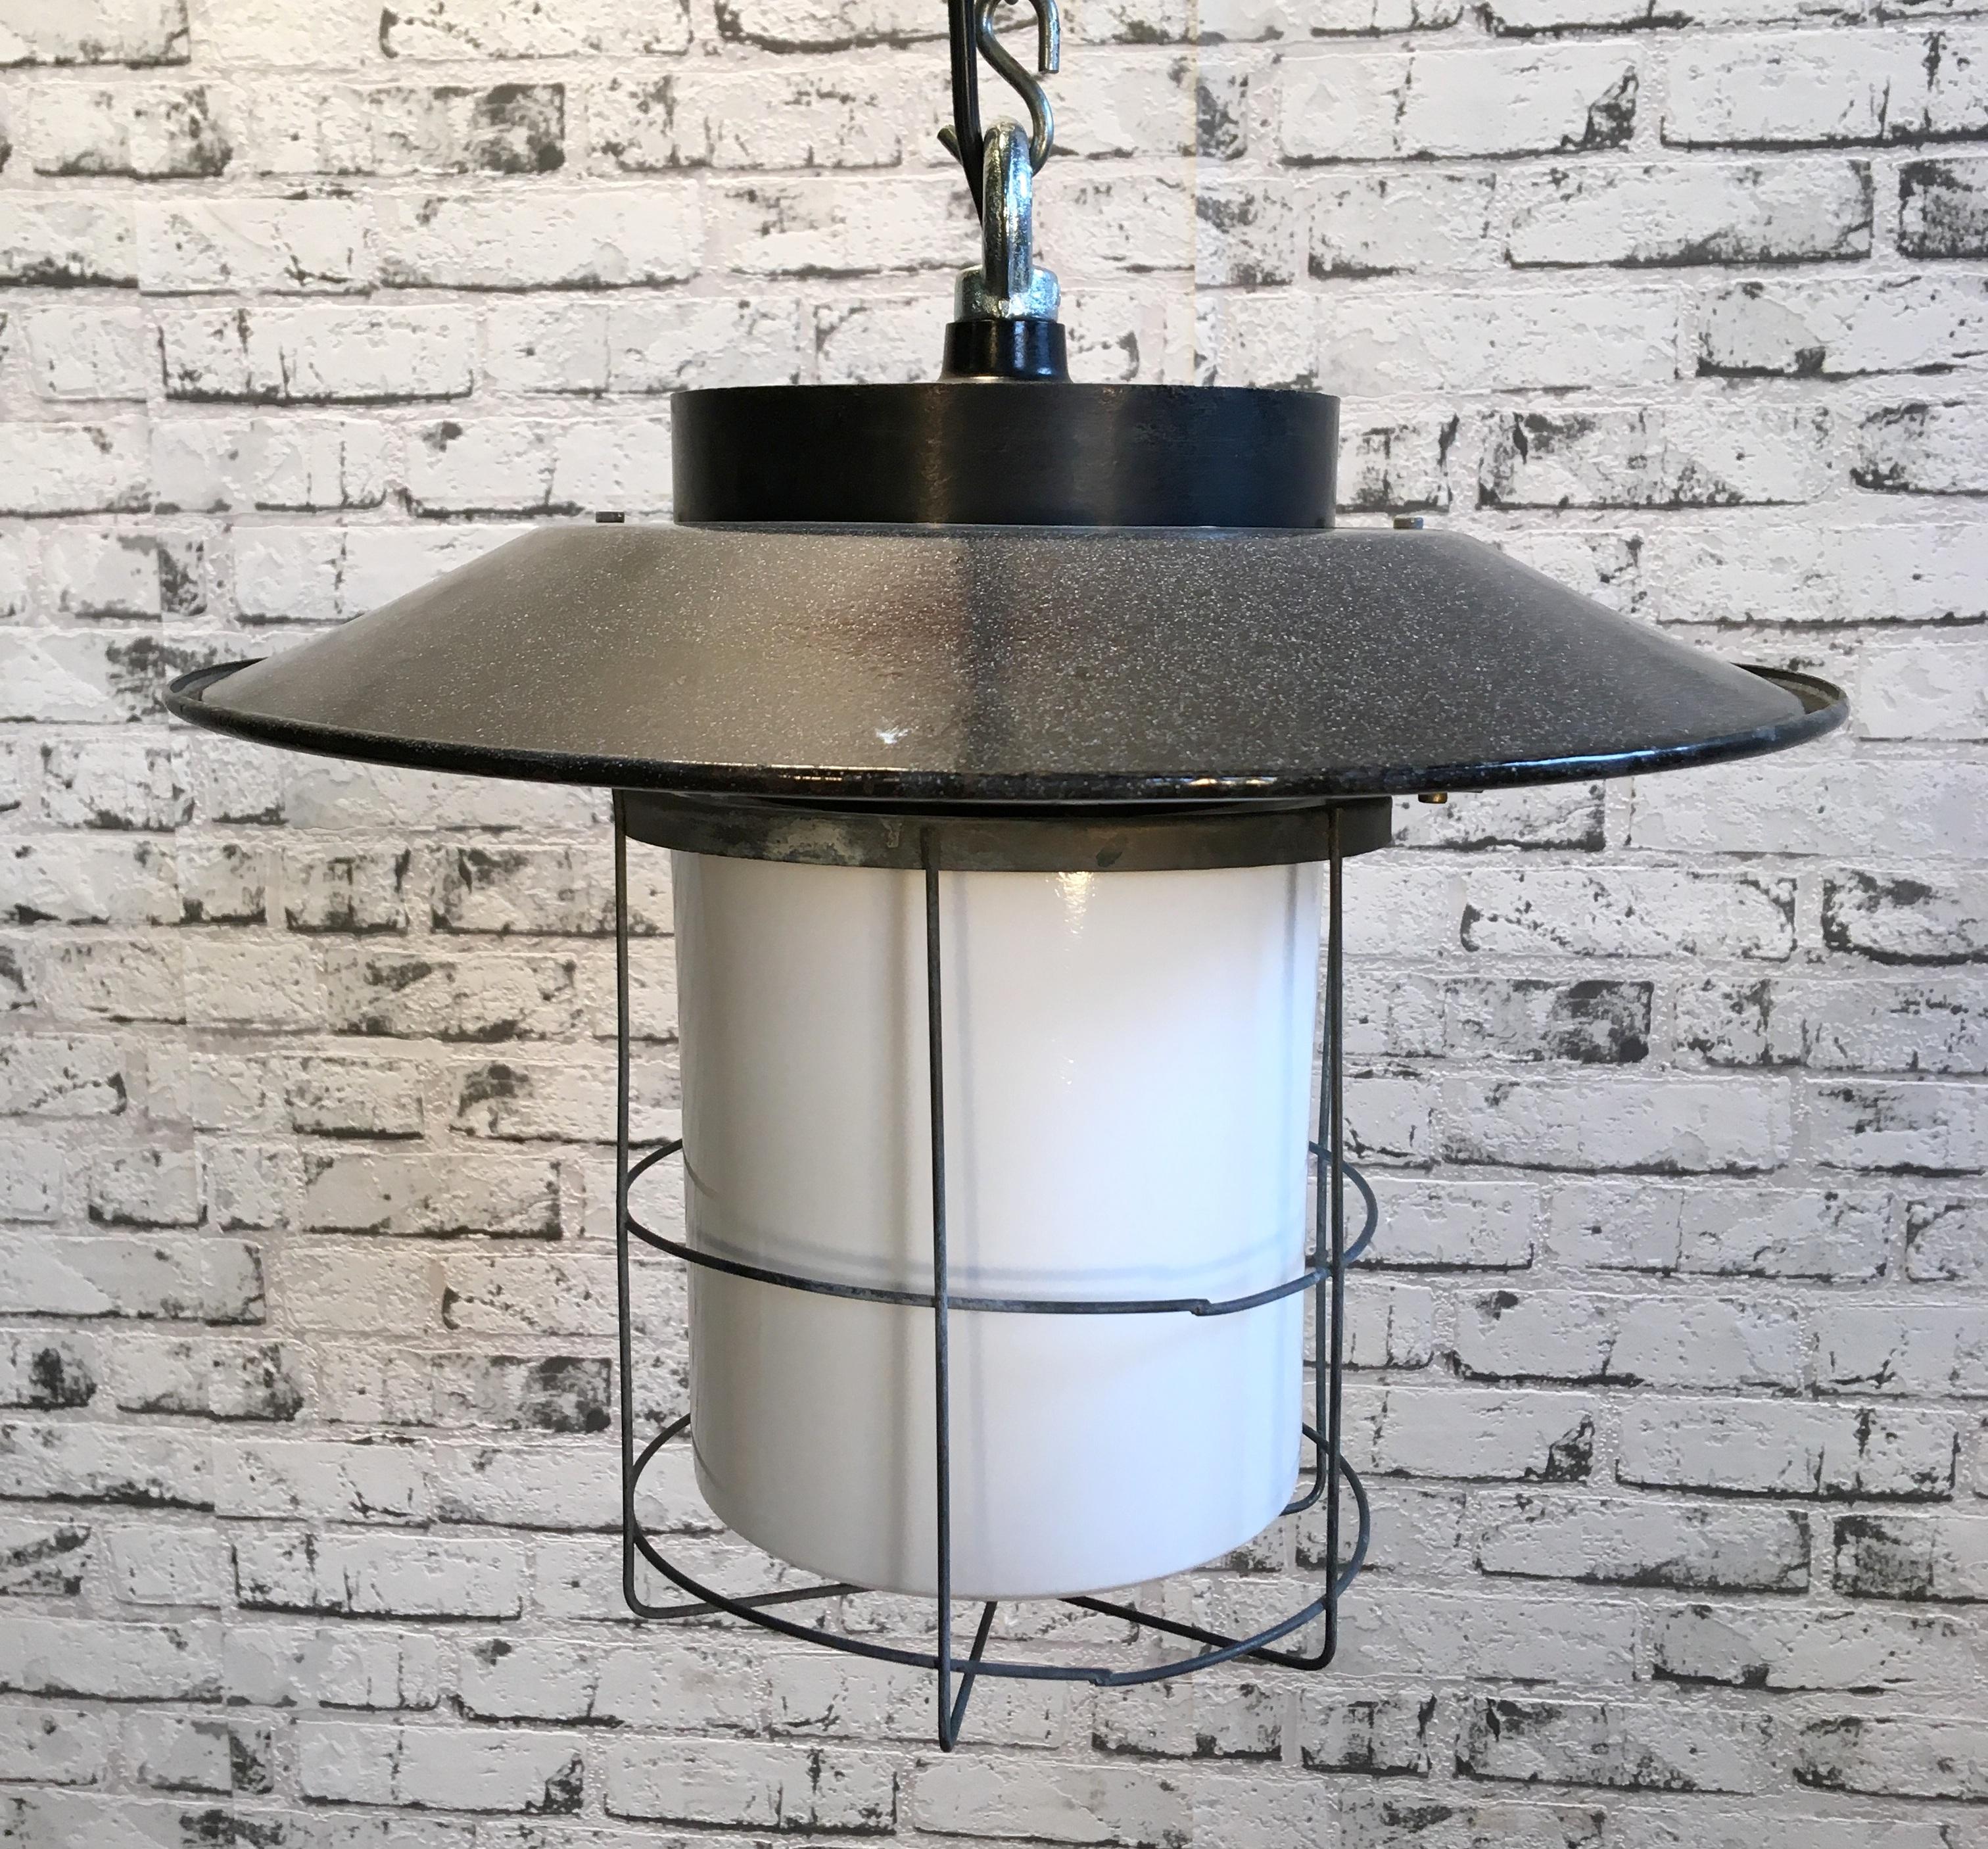 Vintage Industrial lamp from 1960s.
Bakelite top, gray enamel shade, iron cage, milk glass.
New fitting E 27 and wire.